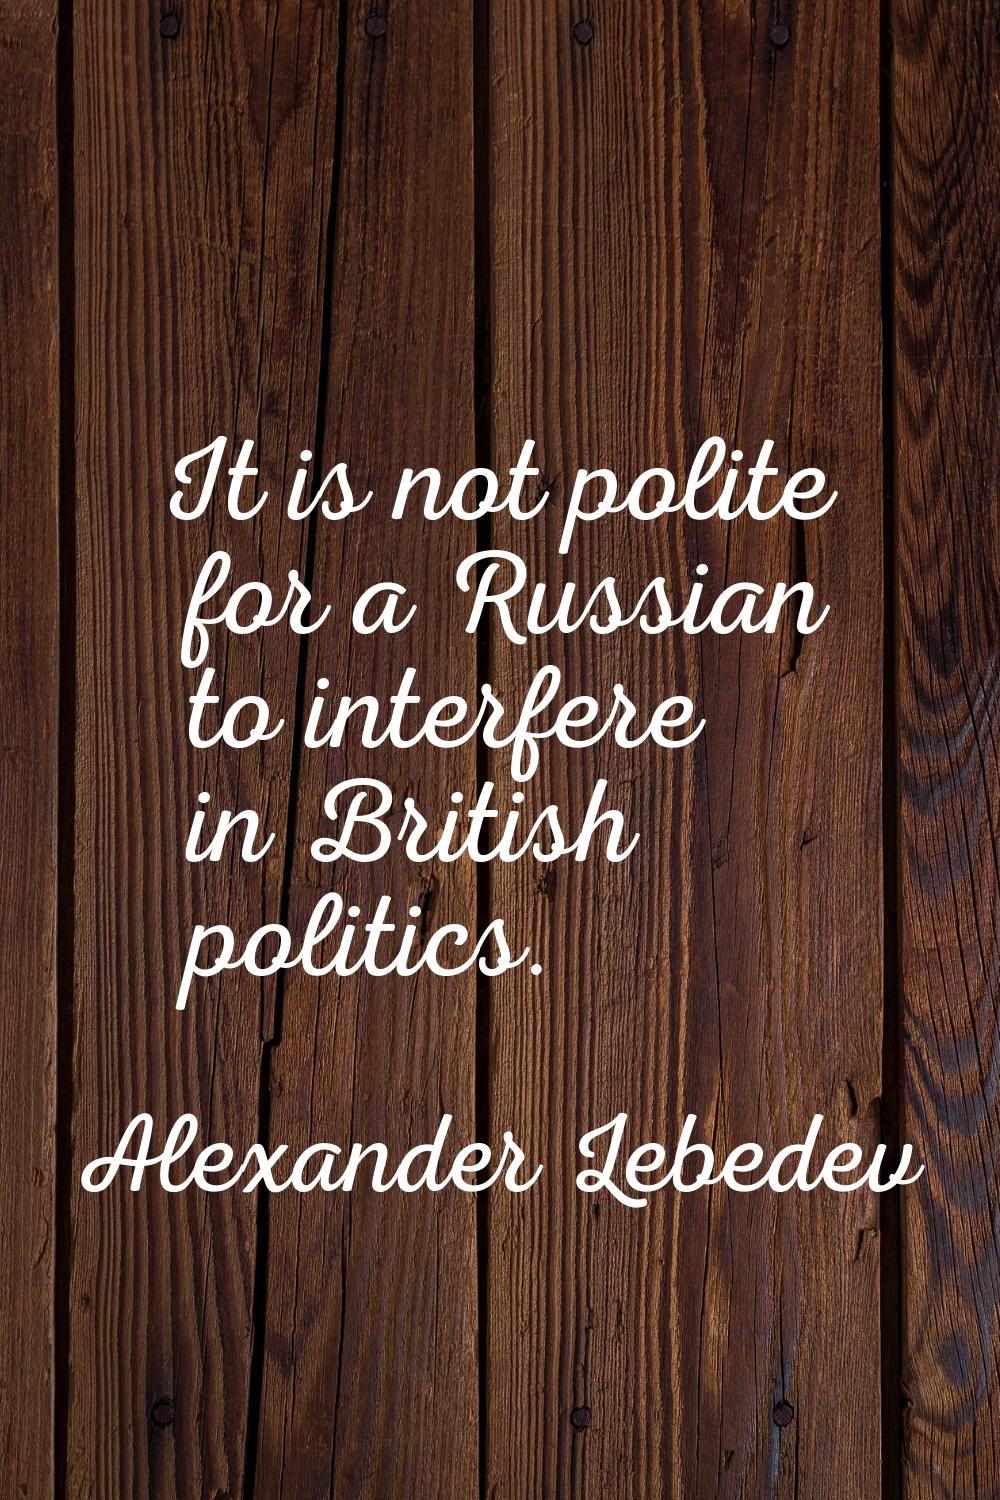 It is not polite for a Russian to interfere in British politics.